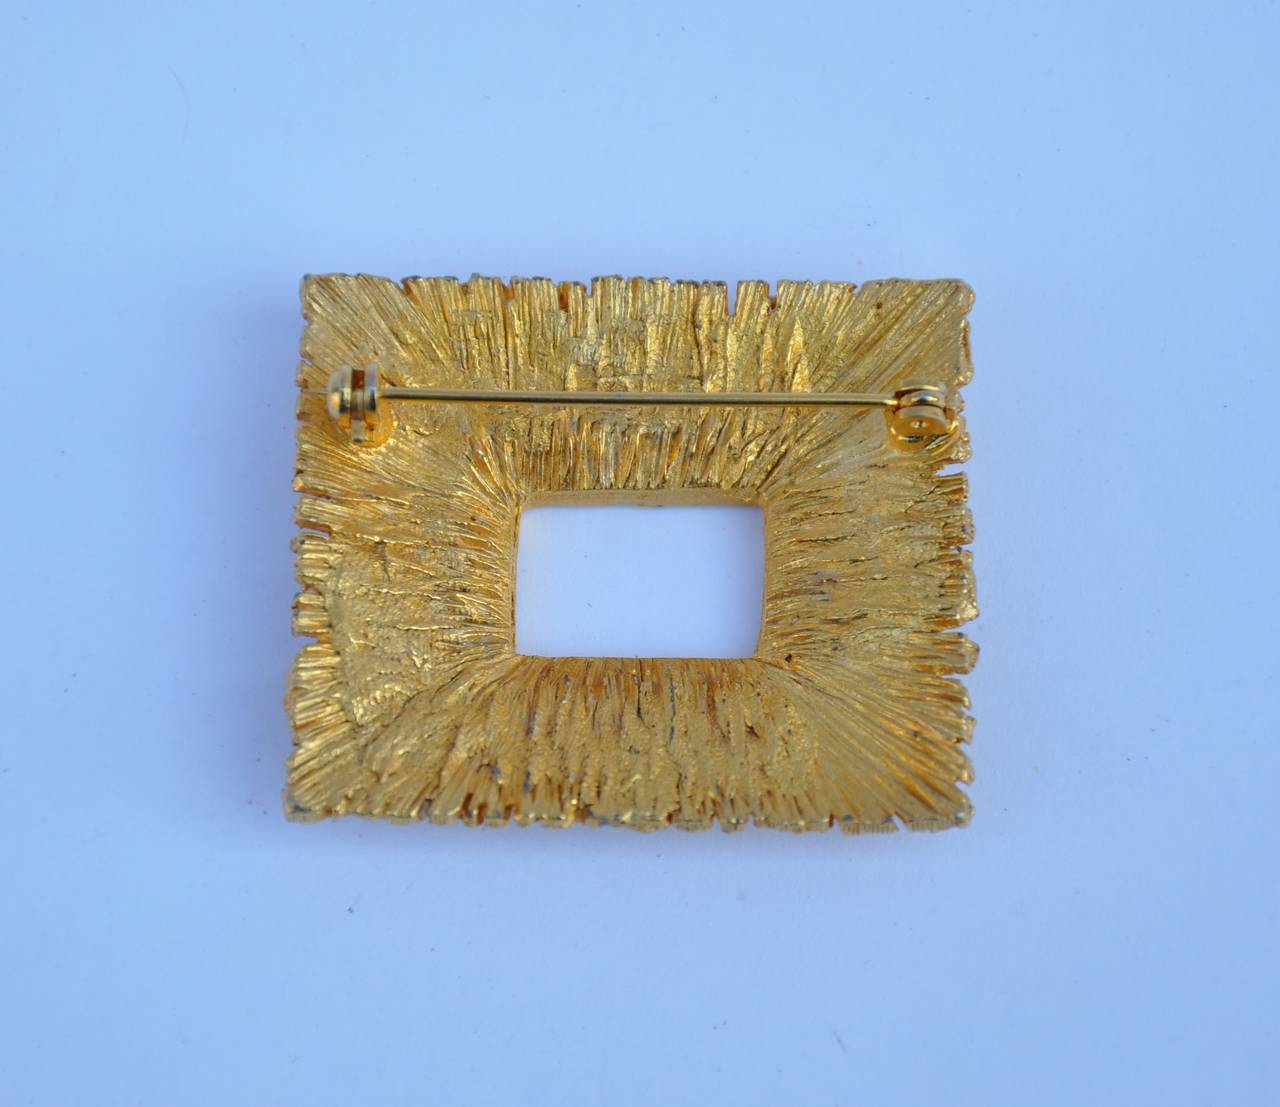 Gilded gold hardware "Frame" brooch measures 1 5/8" in length, 1 2/8" in width and 3/8" in depth.